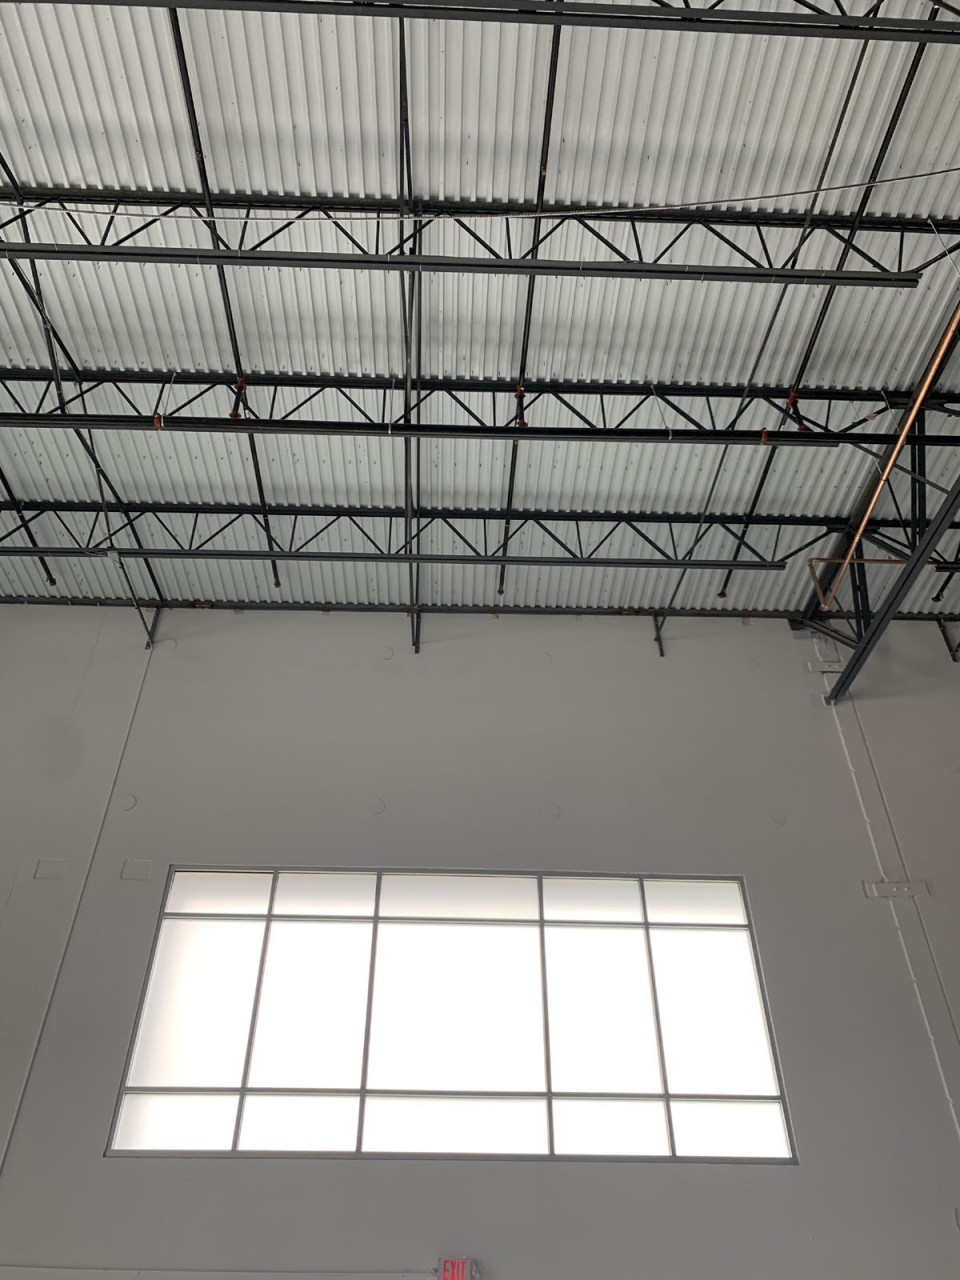 White Frost on glass in warehouse space